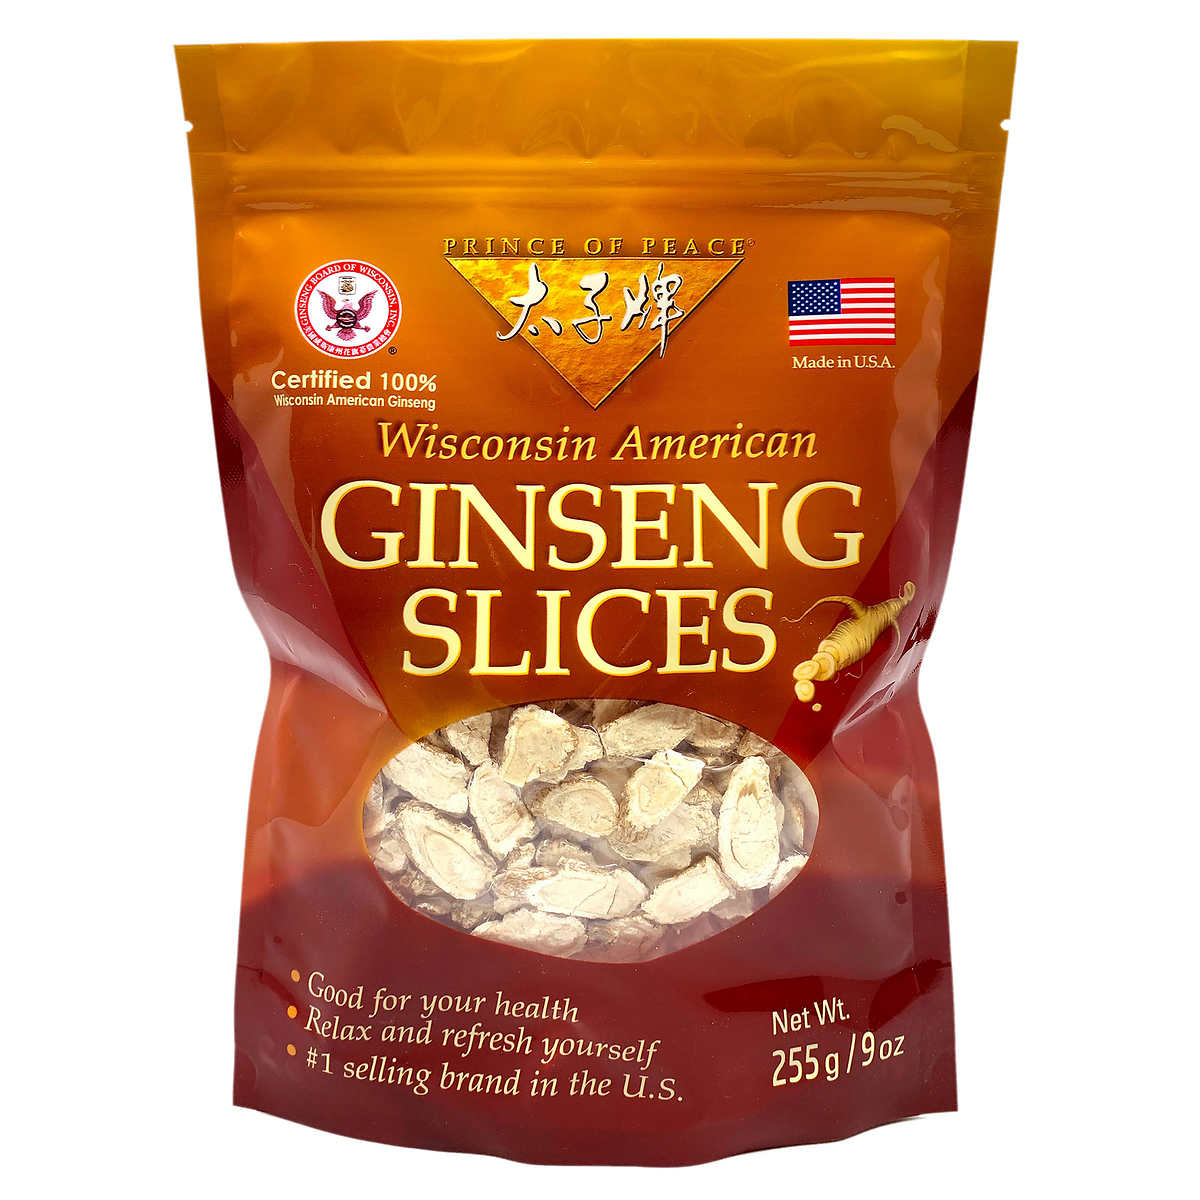 Prince of Peace Ginseng Root Slices, 9 Ounces